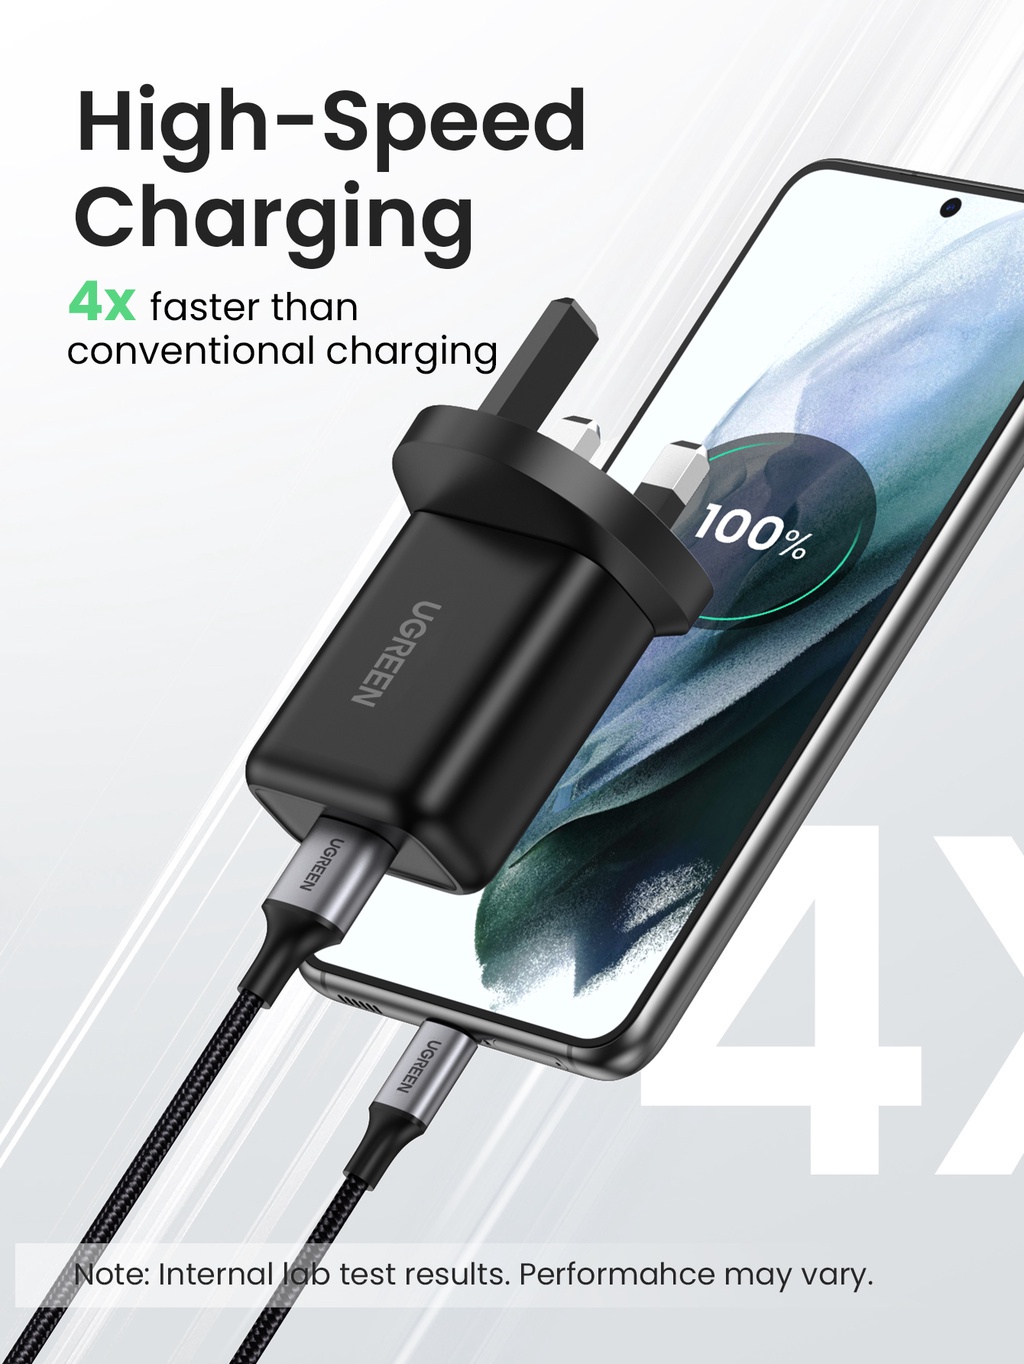 Quick Charge - UGREEN 18W Quick Charge 3.0 USB Wall Charger for Fast Charging - SHOPEE MALL | Sri Lanka